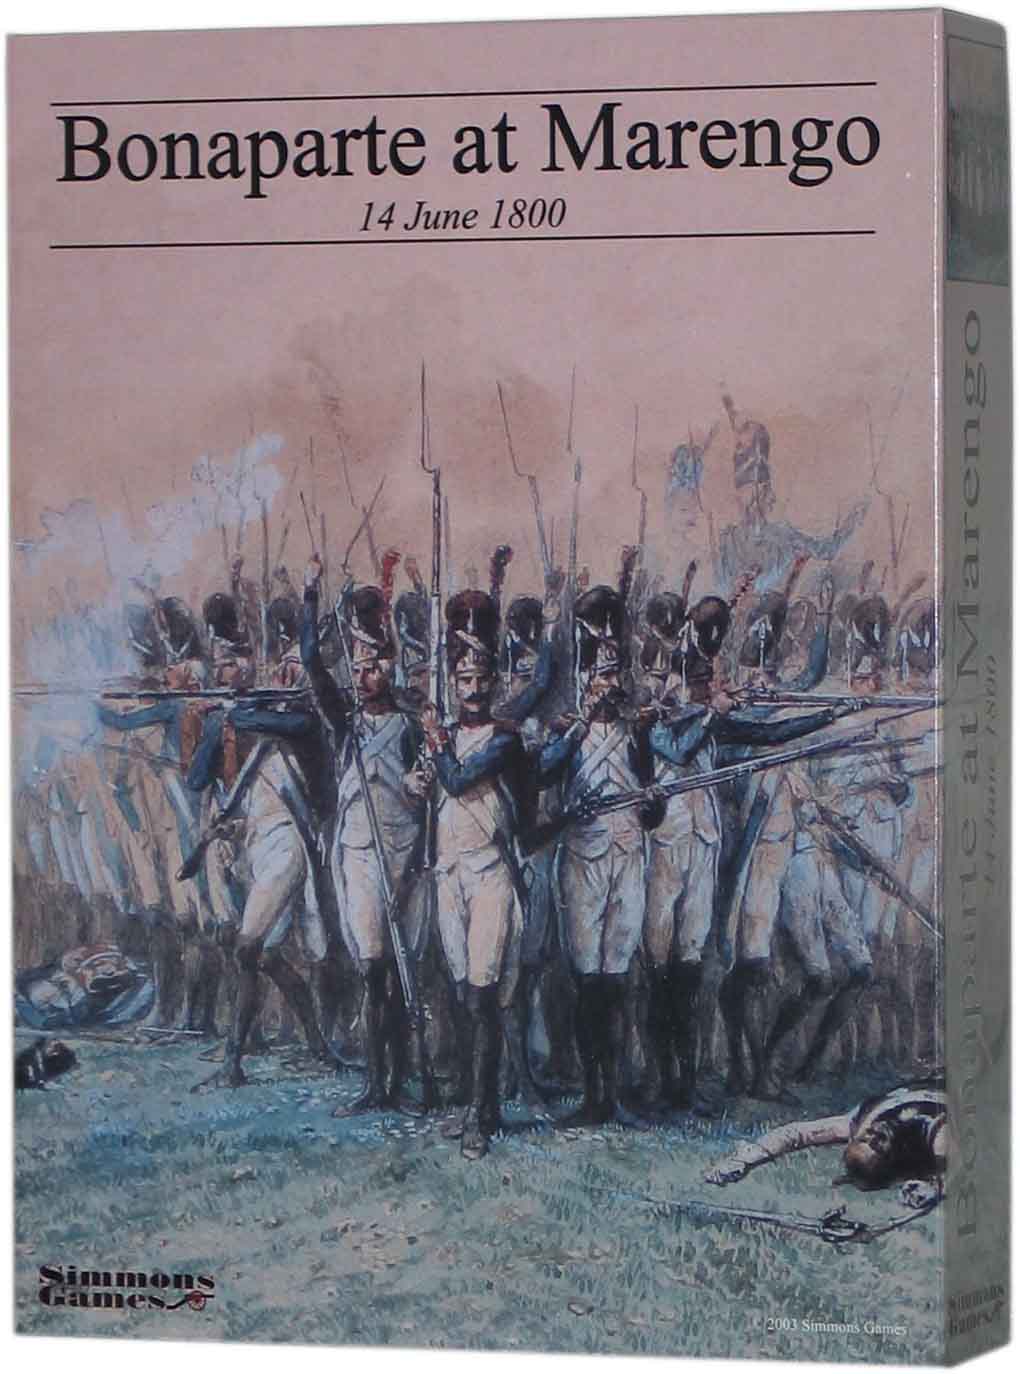 Bonaparte at Marengo by Simmons Games